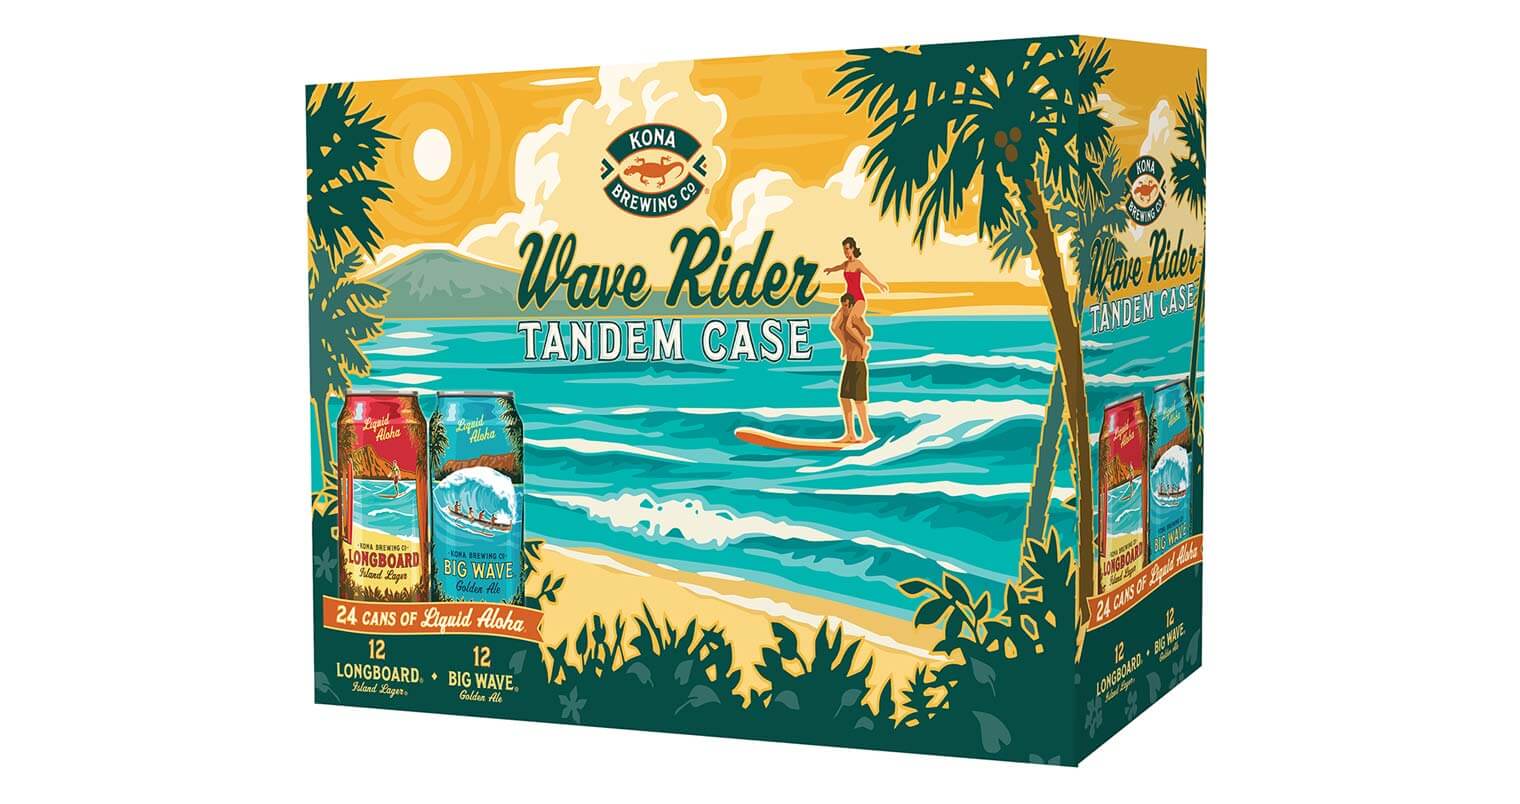 Wave Rider Tandem Case, case packaging on white, featured image